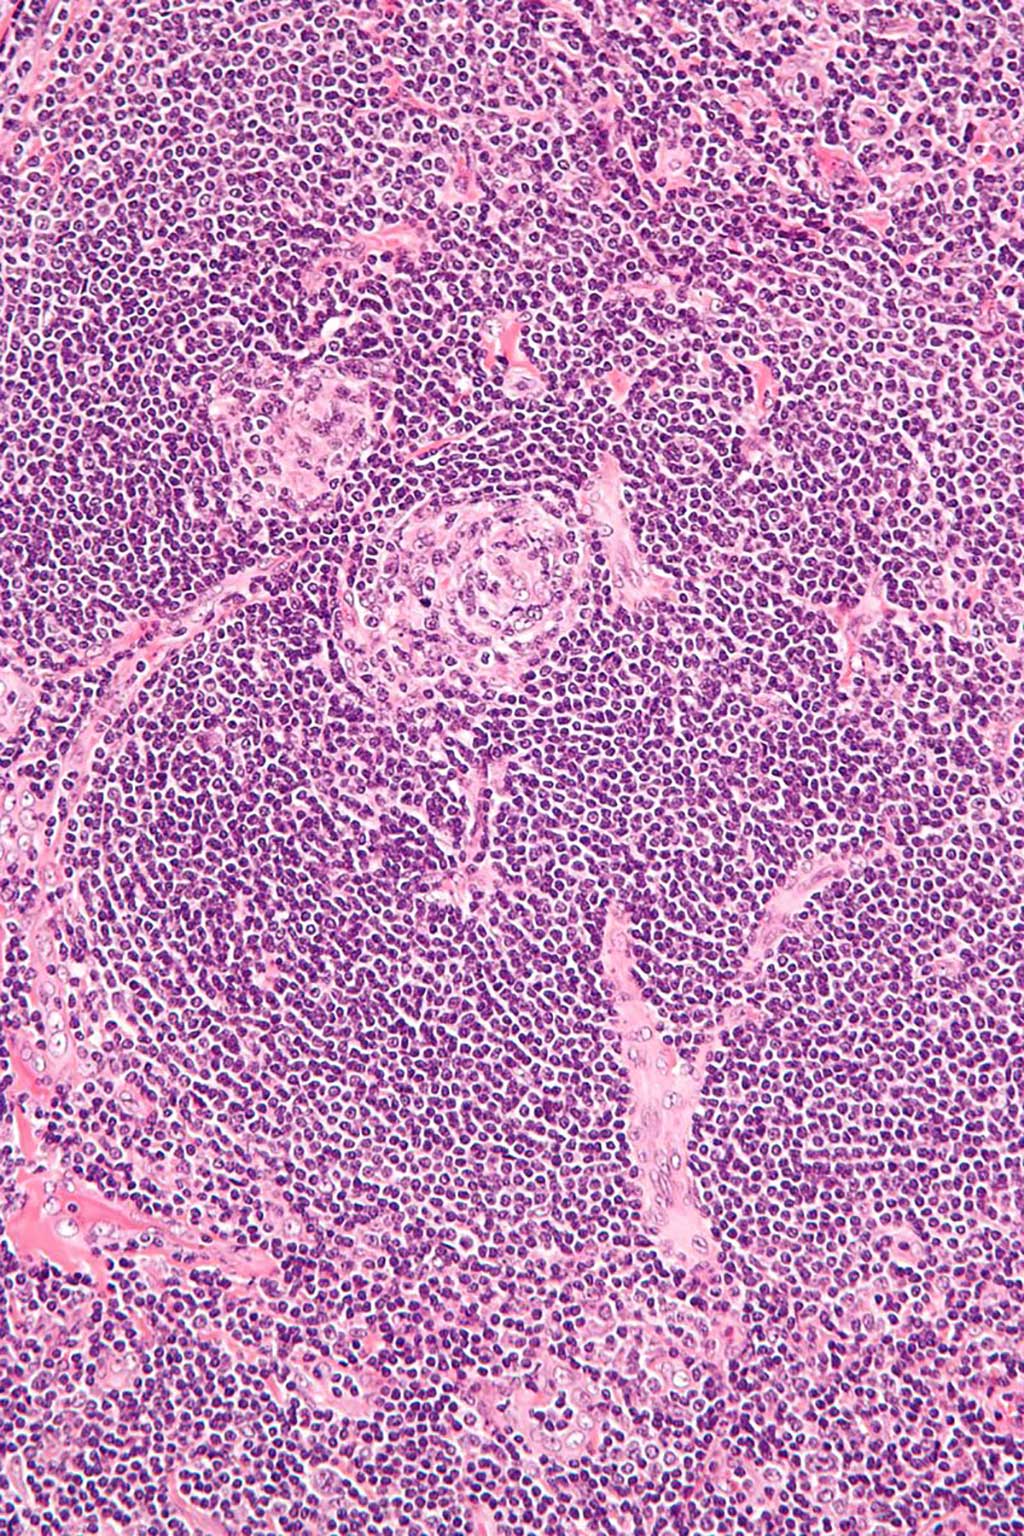 Image: High magnification micrograph of Castleman disease, hyaline vascular variant, also known as angiofollicular lymph node hyperplasia and giant lymph node hyperplasia (Photo courtesy of Wikimedia Commons)